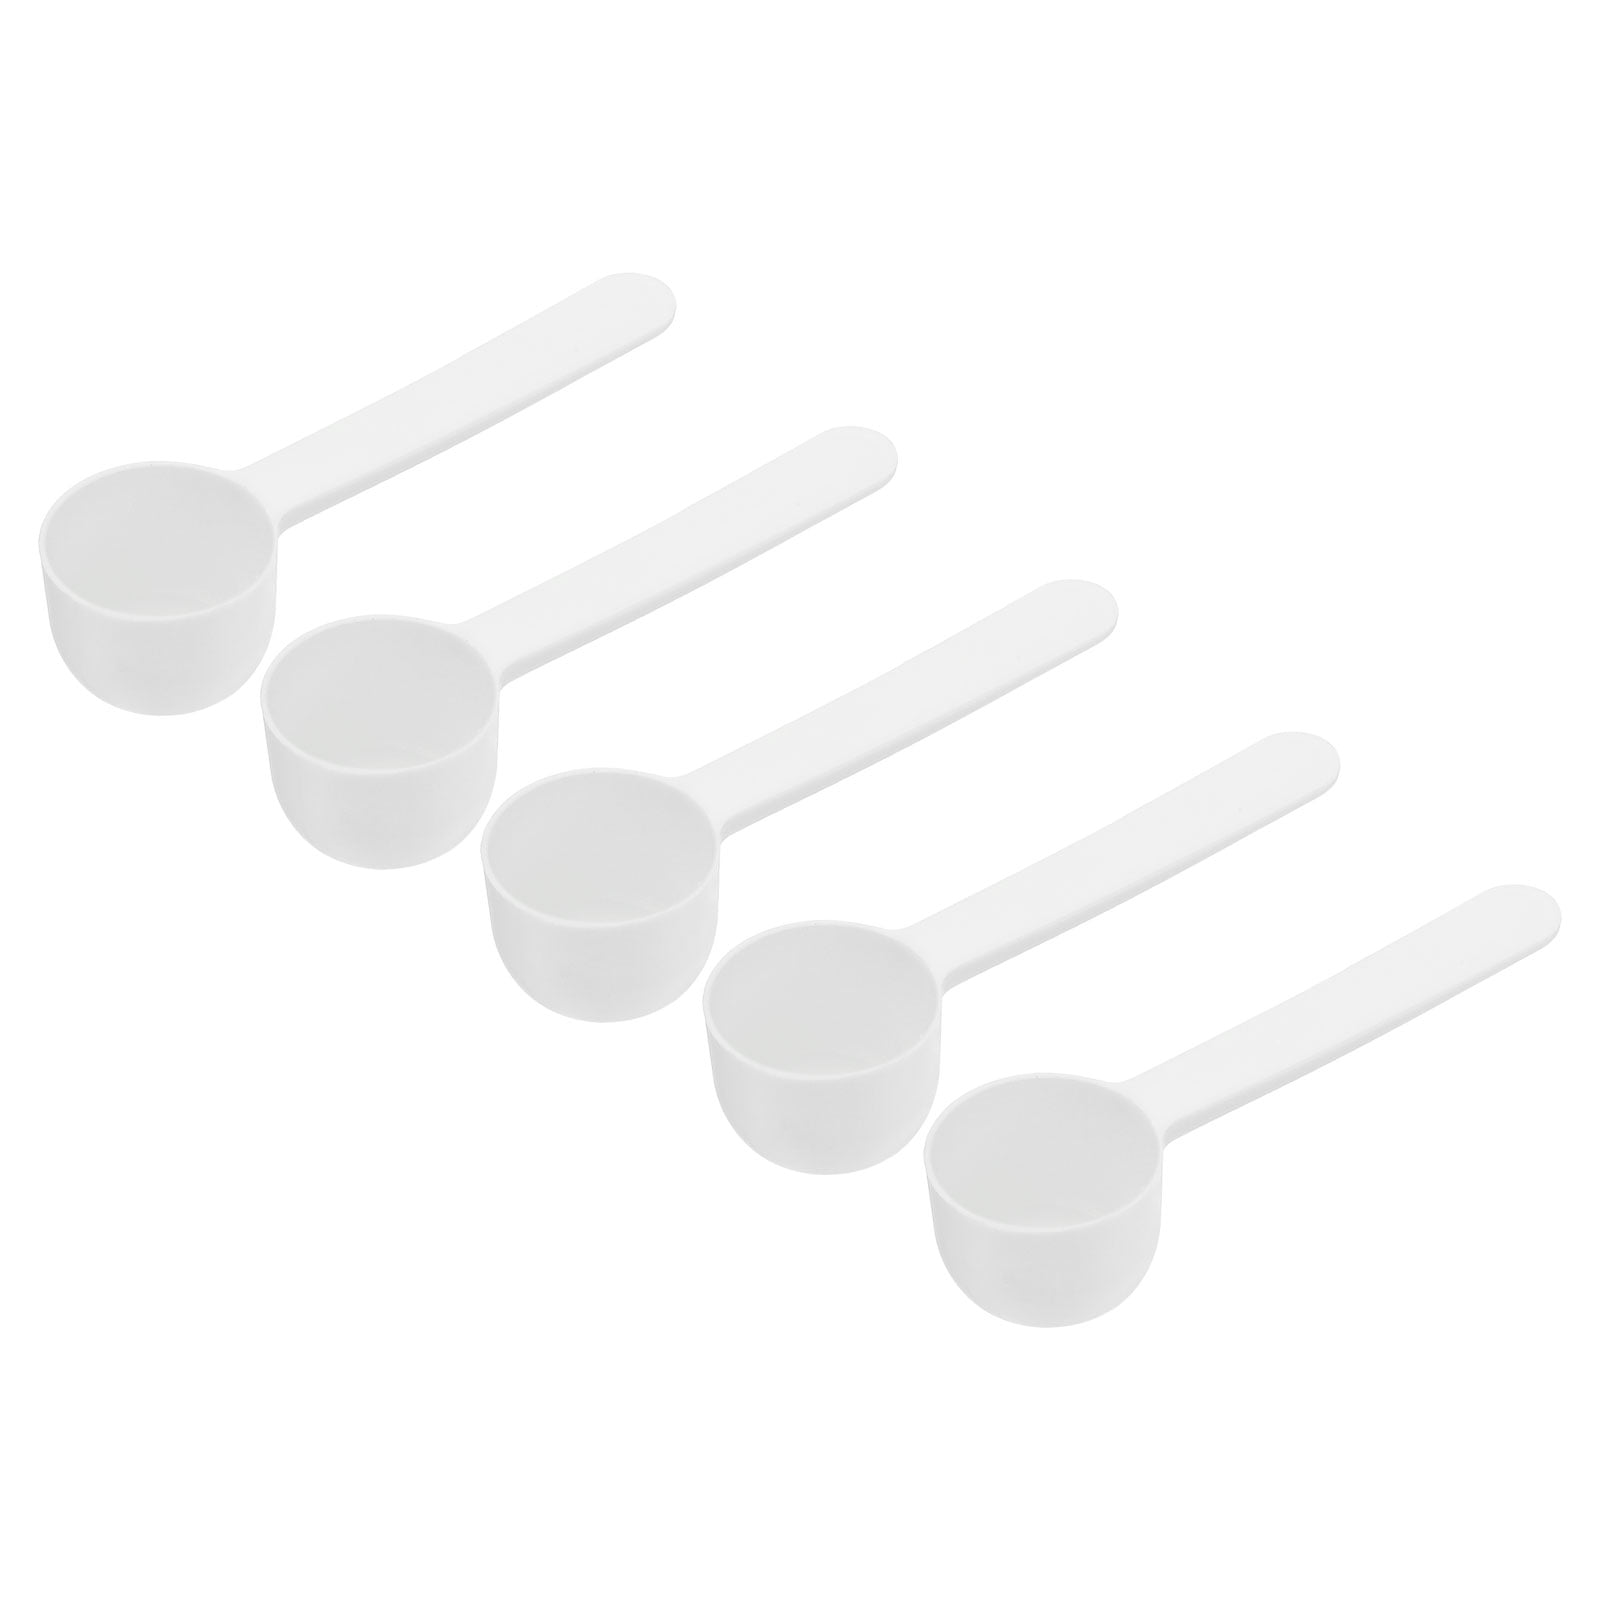 Micro Scoops 10 MG-15 mg Spoon (Micro Scoop) mg Measuring Spoons (Multiple Sizes) - BPA-Free - Long Handle for Convenience - 10mg Scoop for Powders